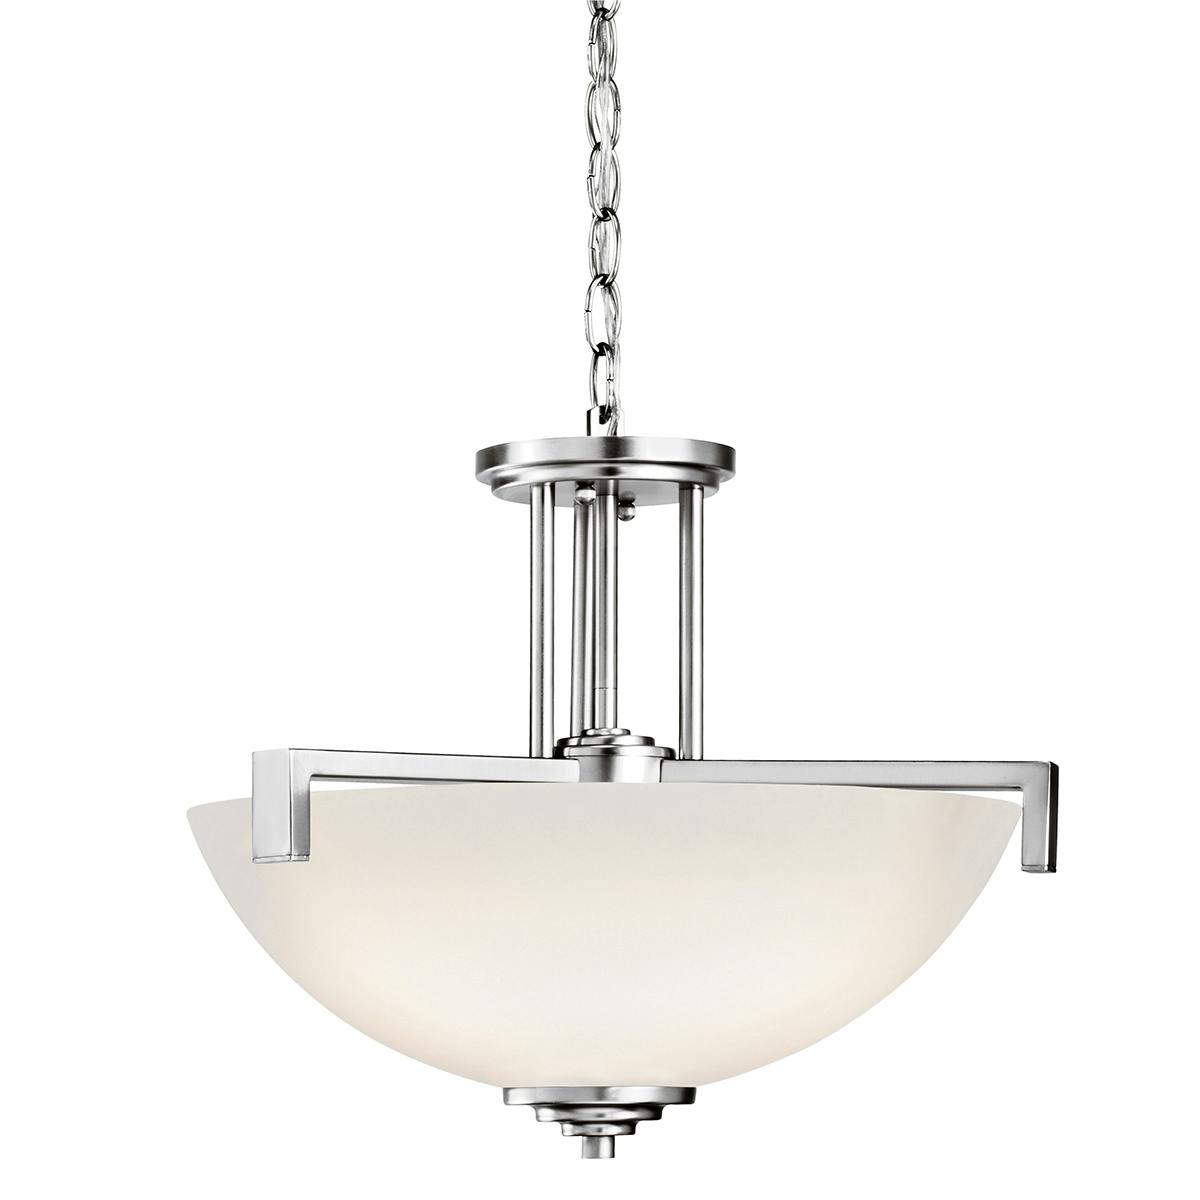 Product image of the 3797CHL18 shown hung as a pendant